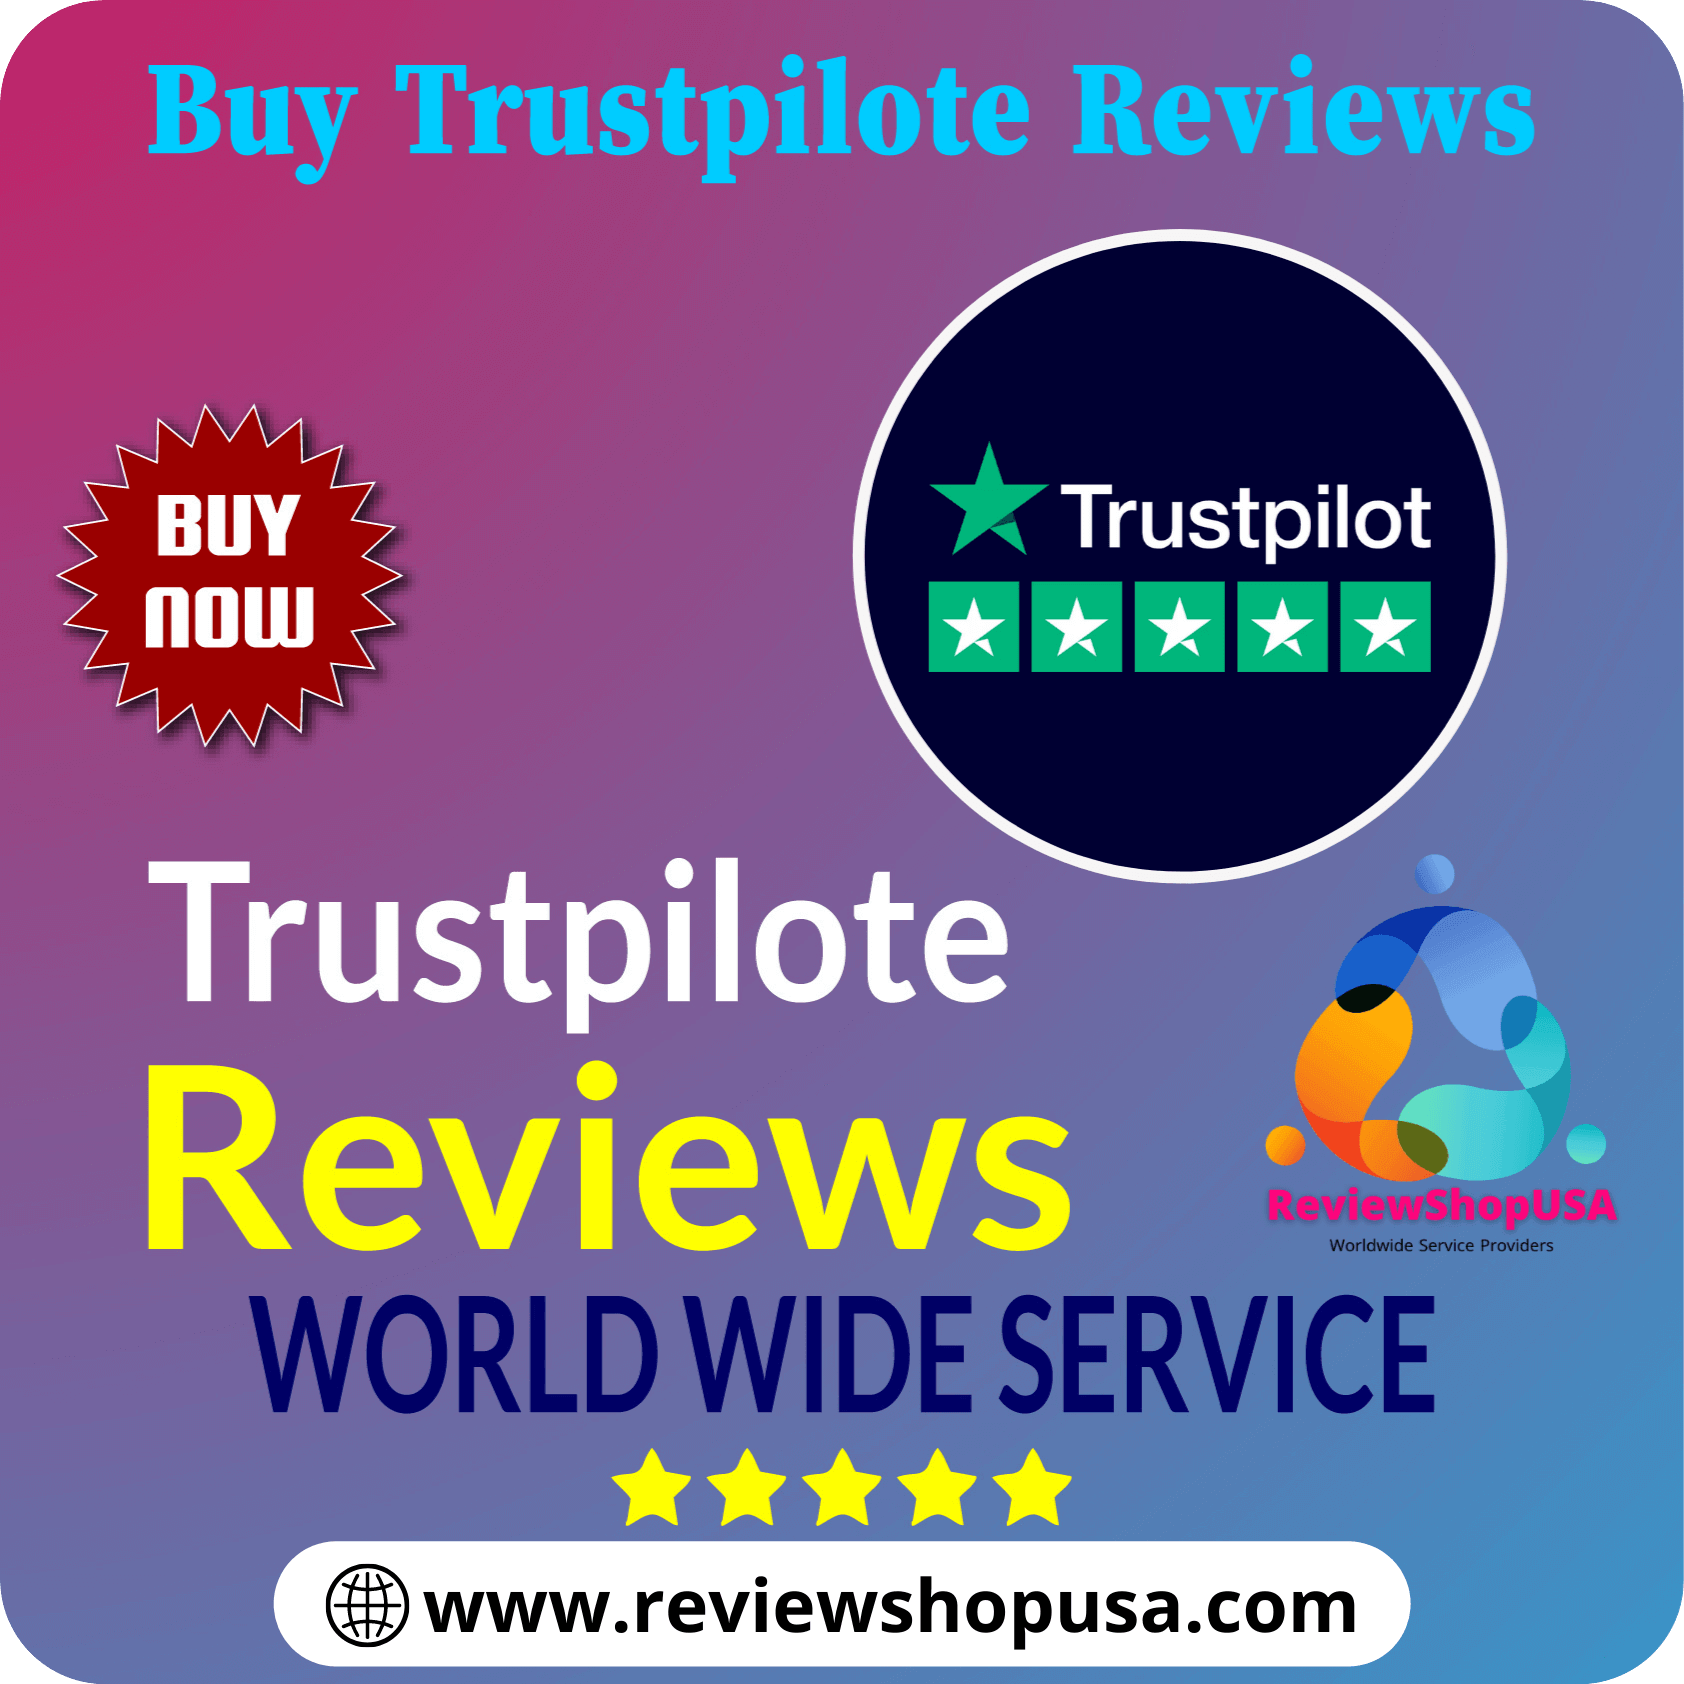 Buy Trustpilot Reviews - Buy Trustpilot Reviews For You business